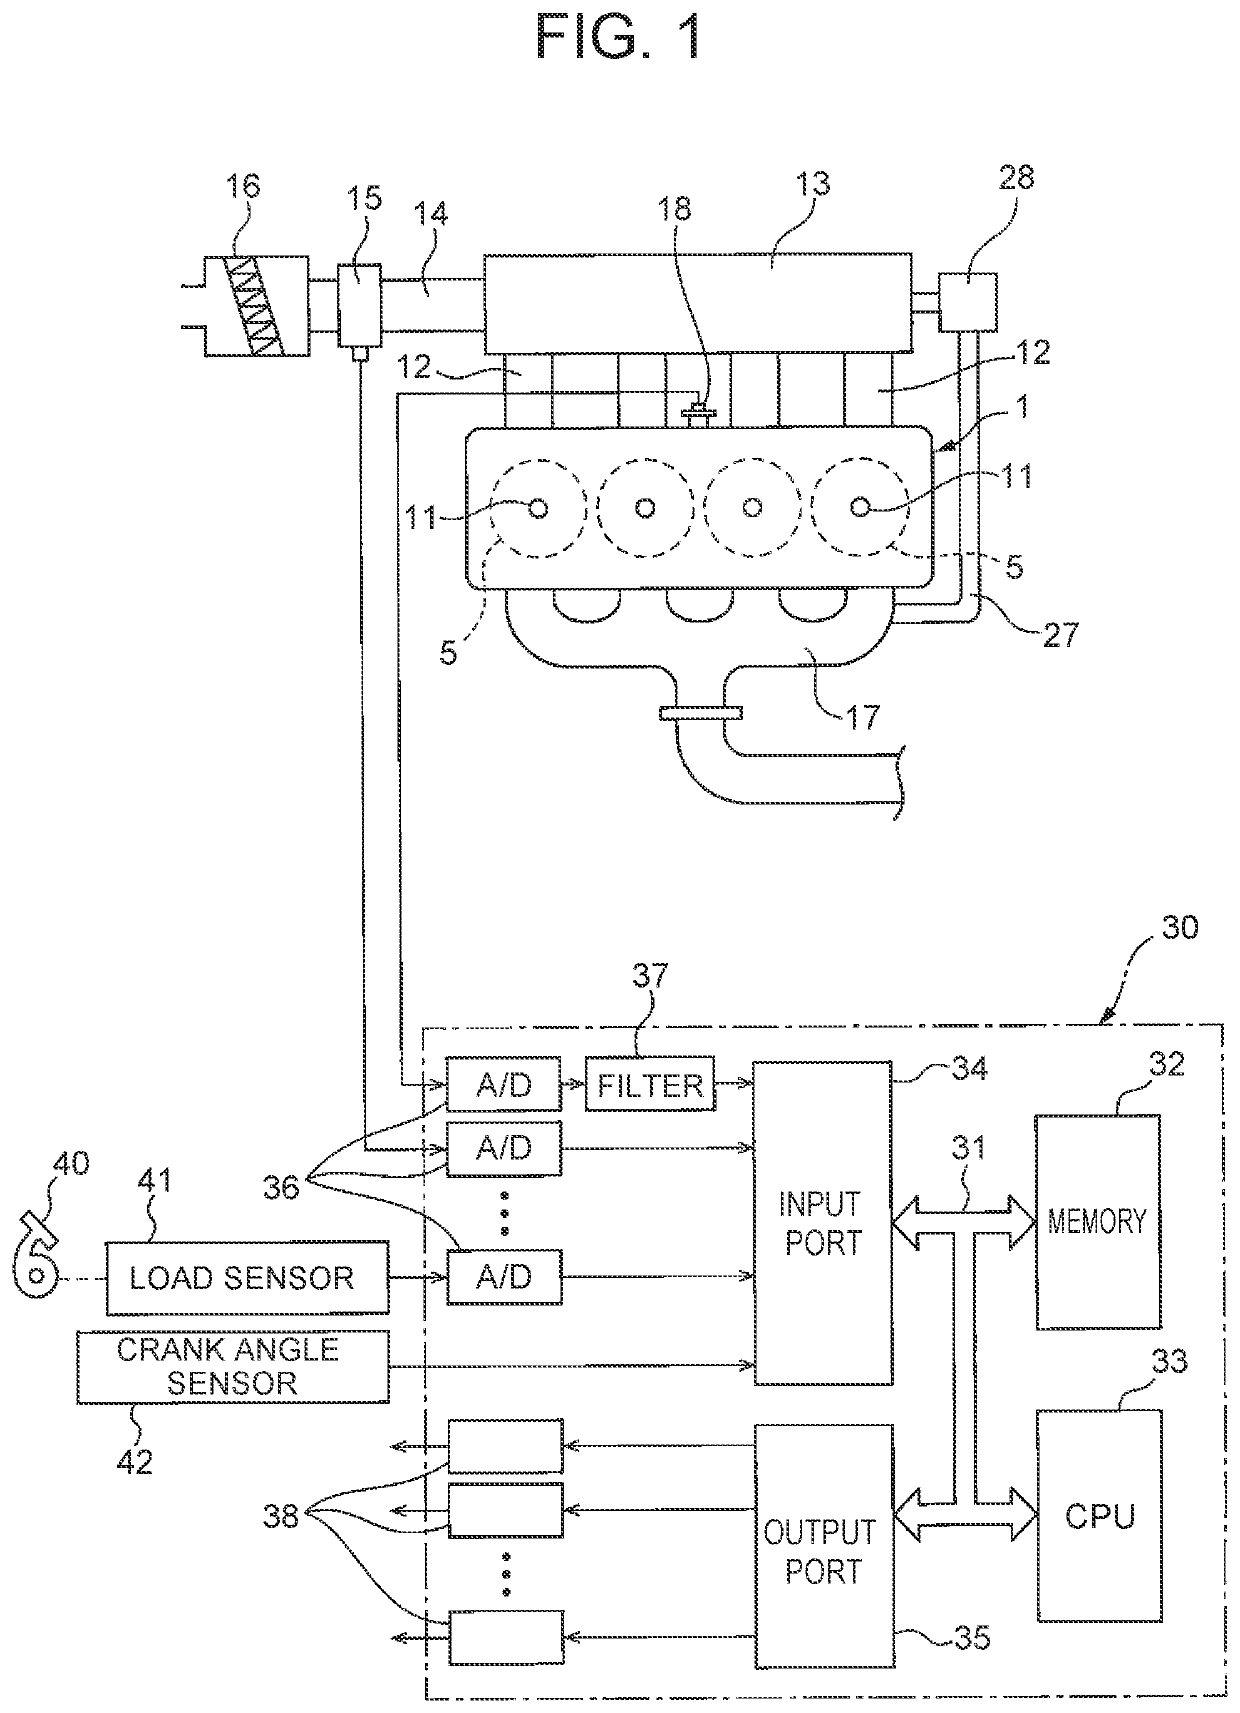 Ignition timing control device for internal combustion engine